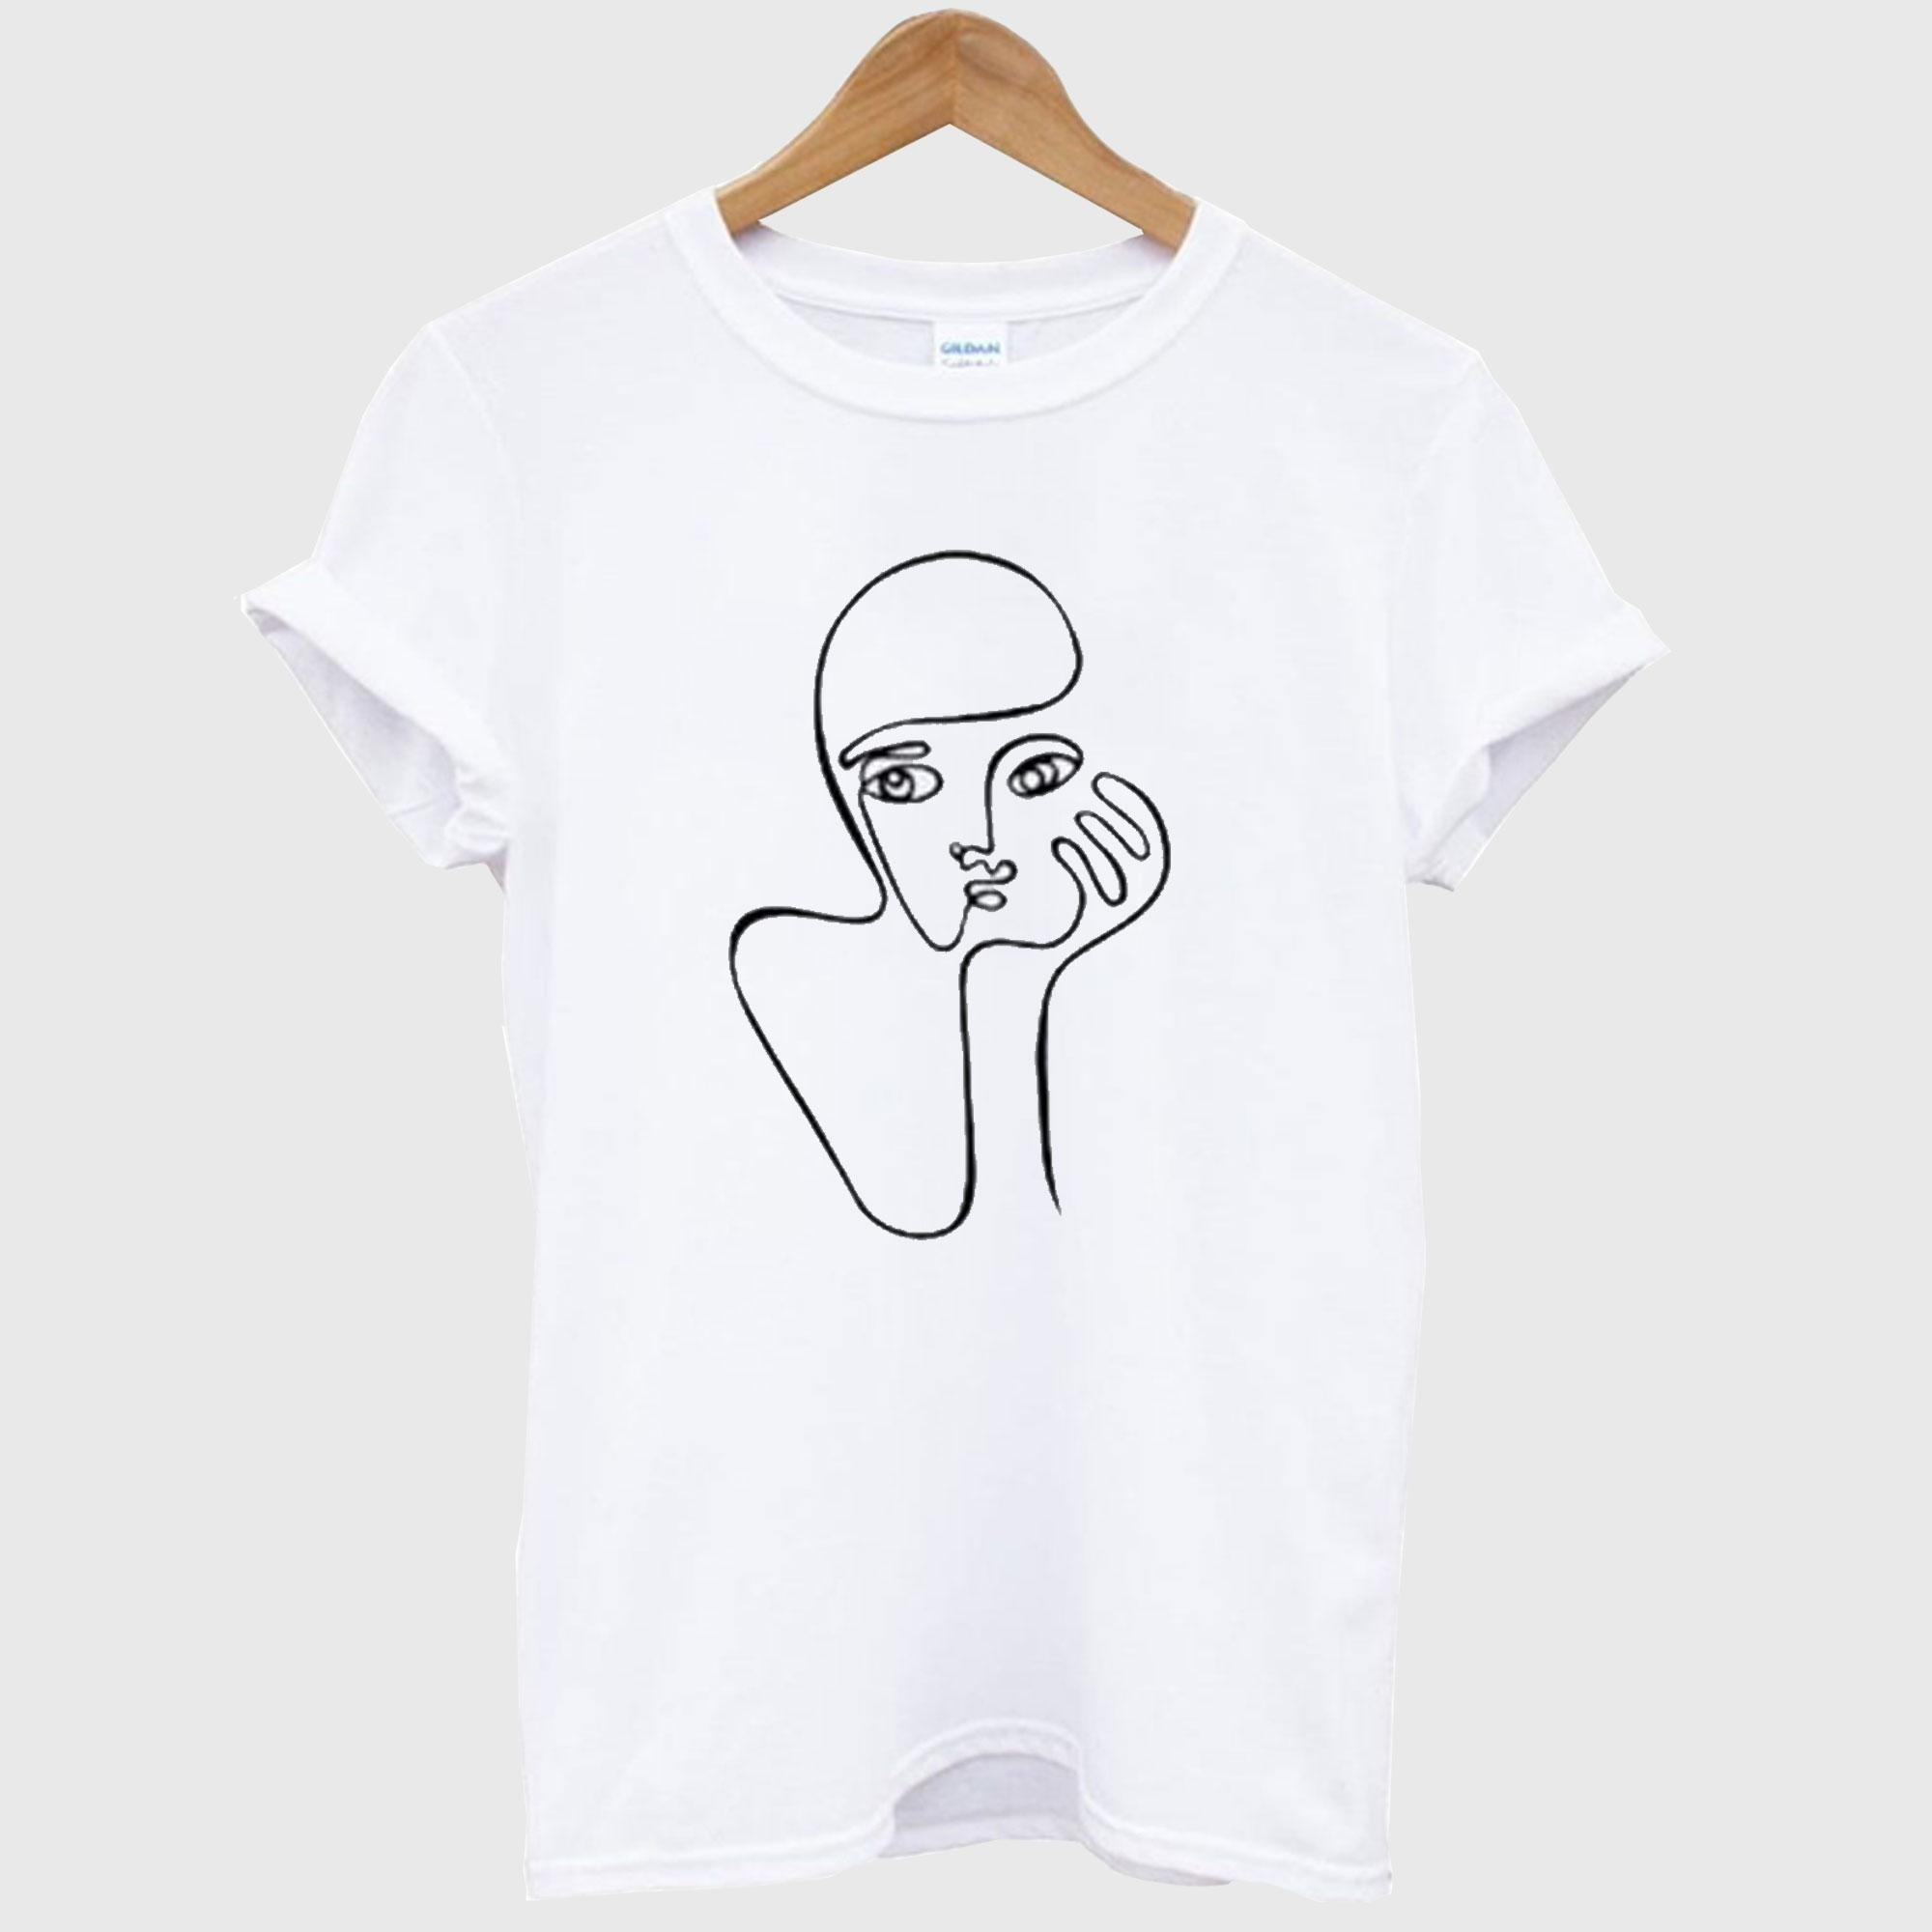 One Line Drawing T Shirt